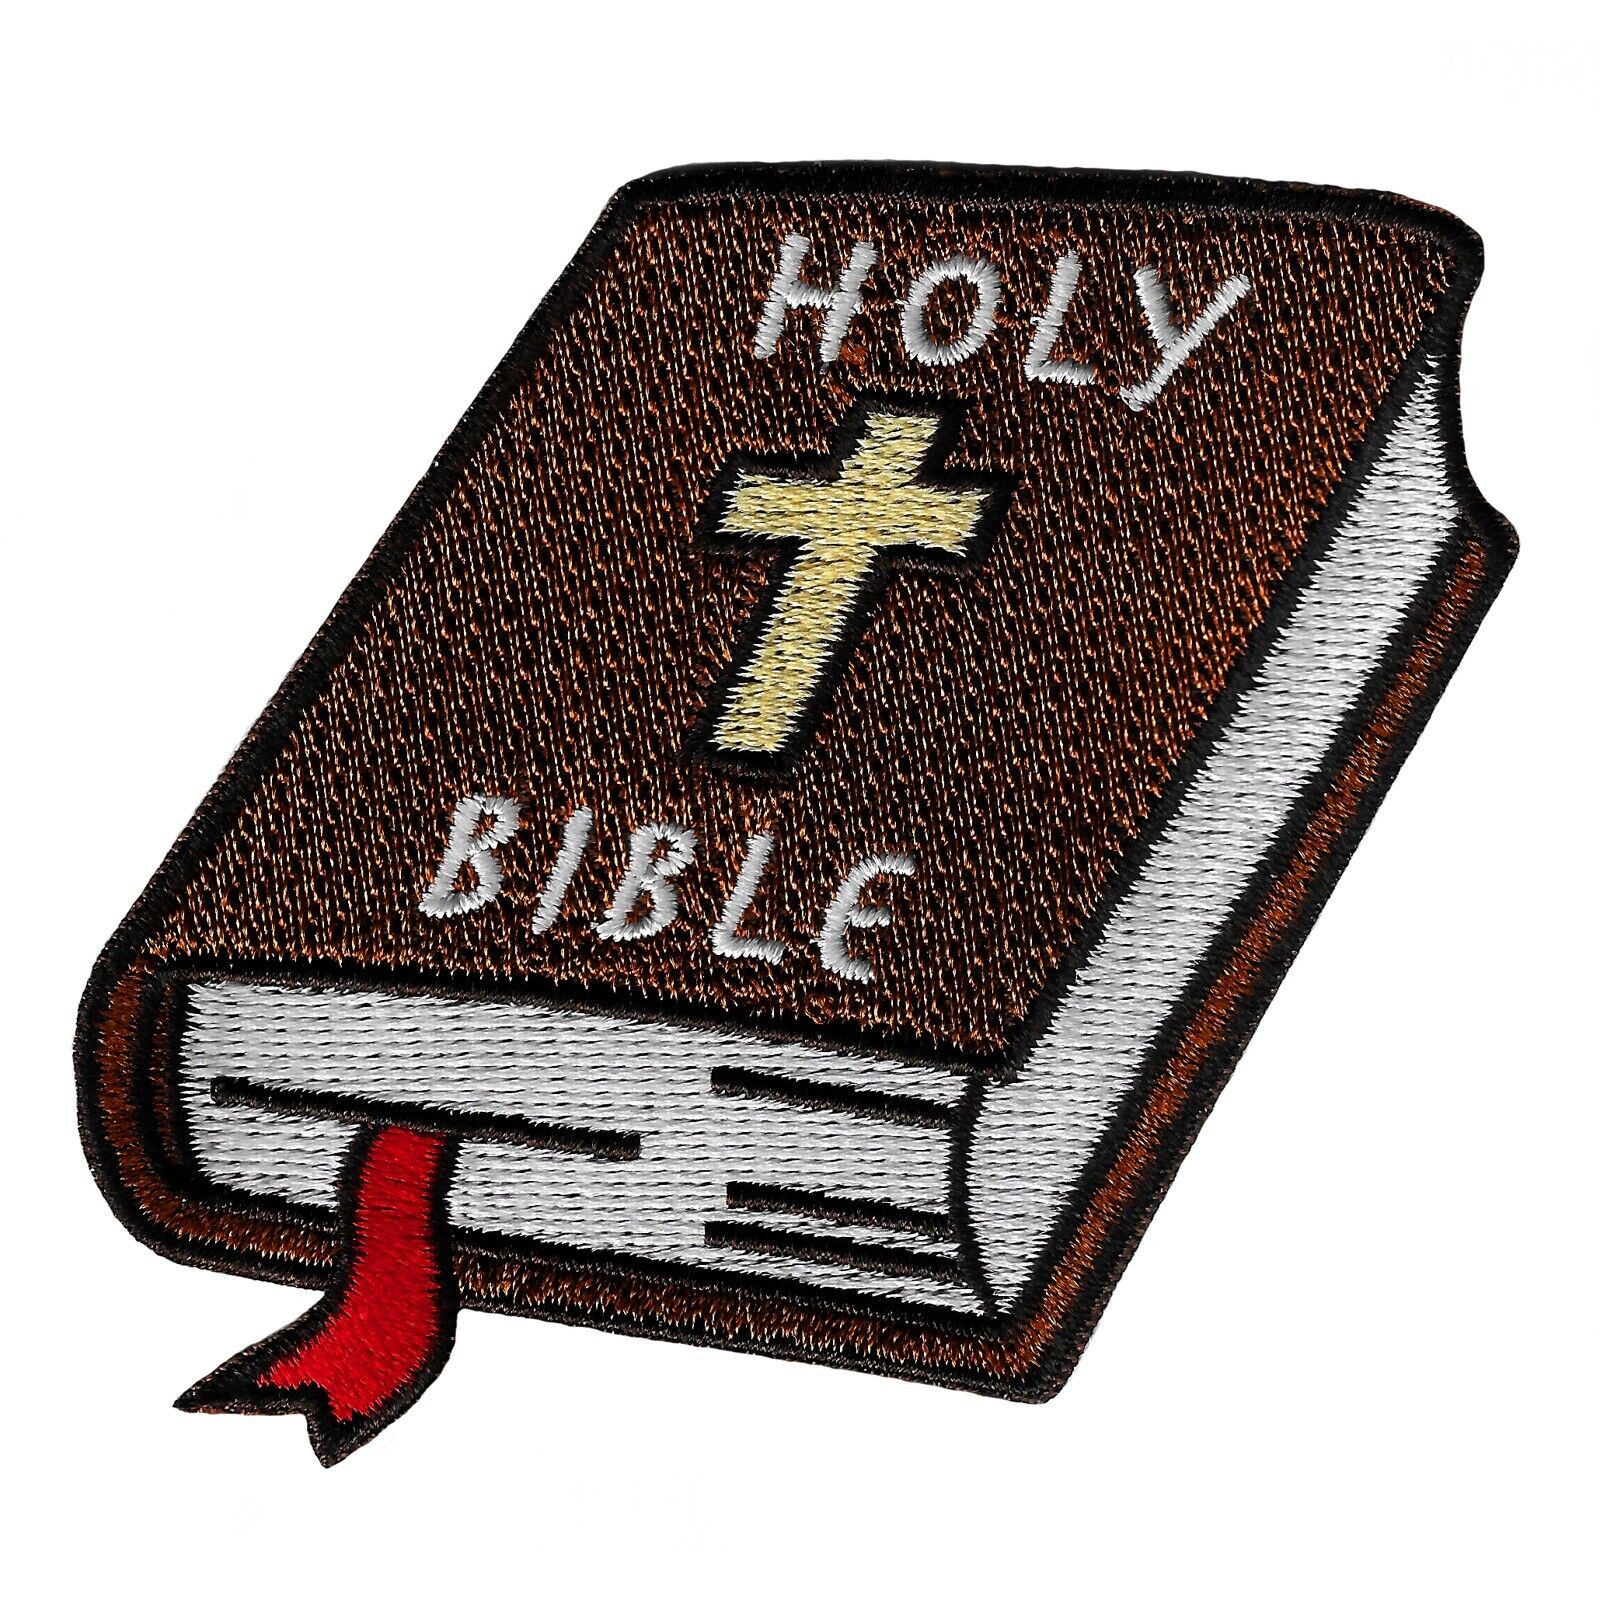 HOLY BIBLE PATCH CHRISTIAN RELIGIOUS embroidered iron-on BIBLE VERSE JESUS